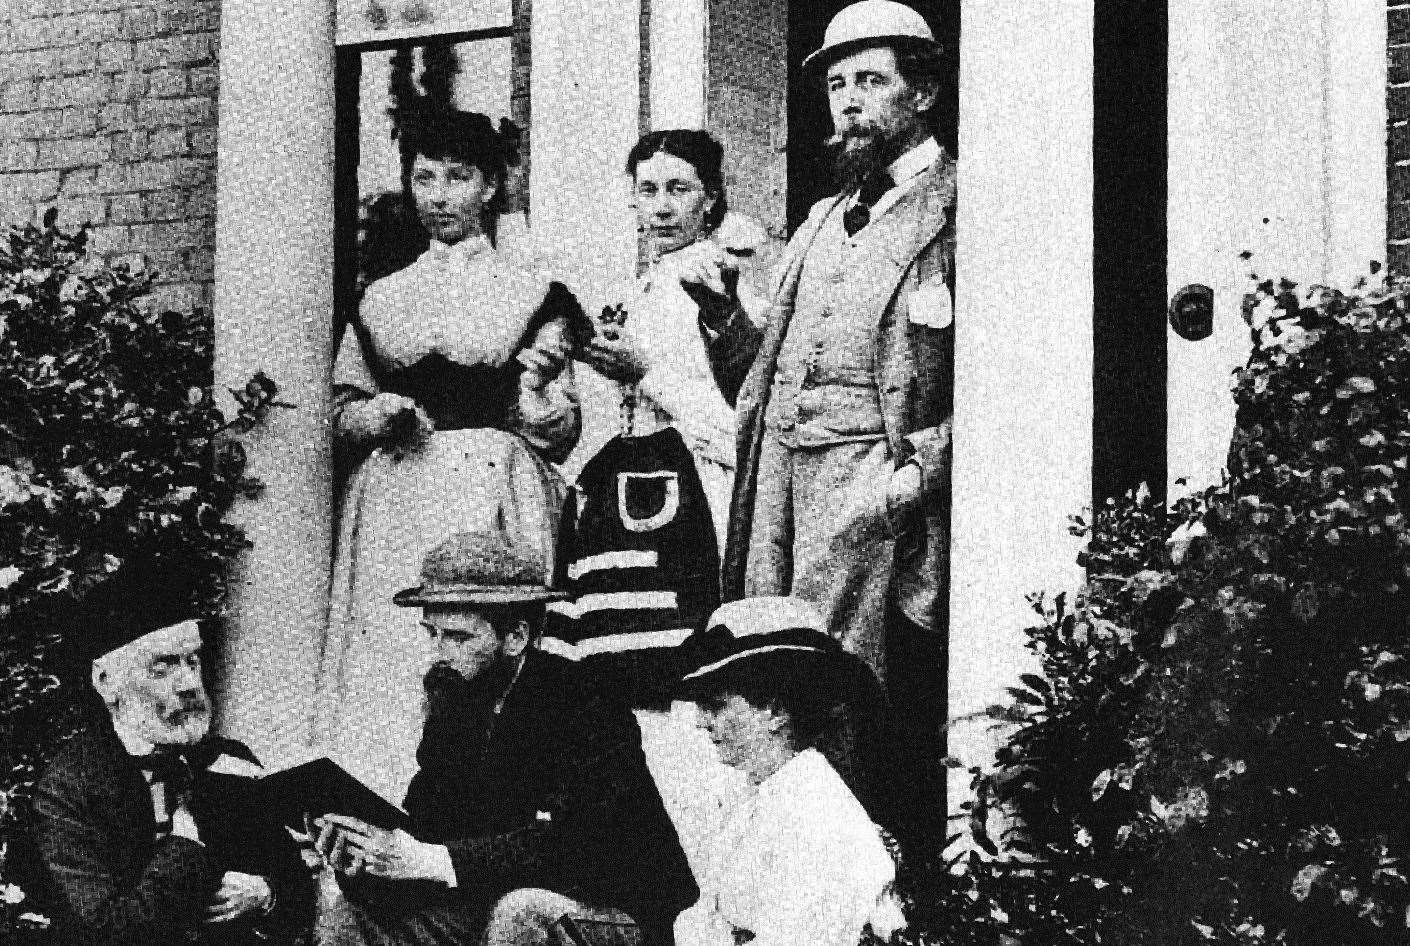 Charles Dickens, far right, in front of his Higham home - today it is Gad's Hill public school. Picture: Gad's Hill School